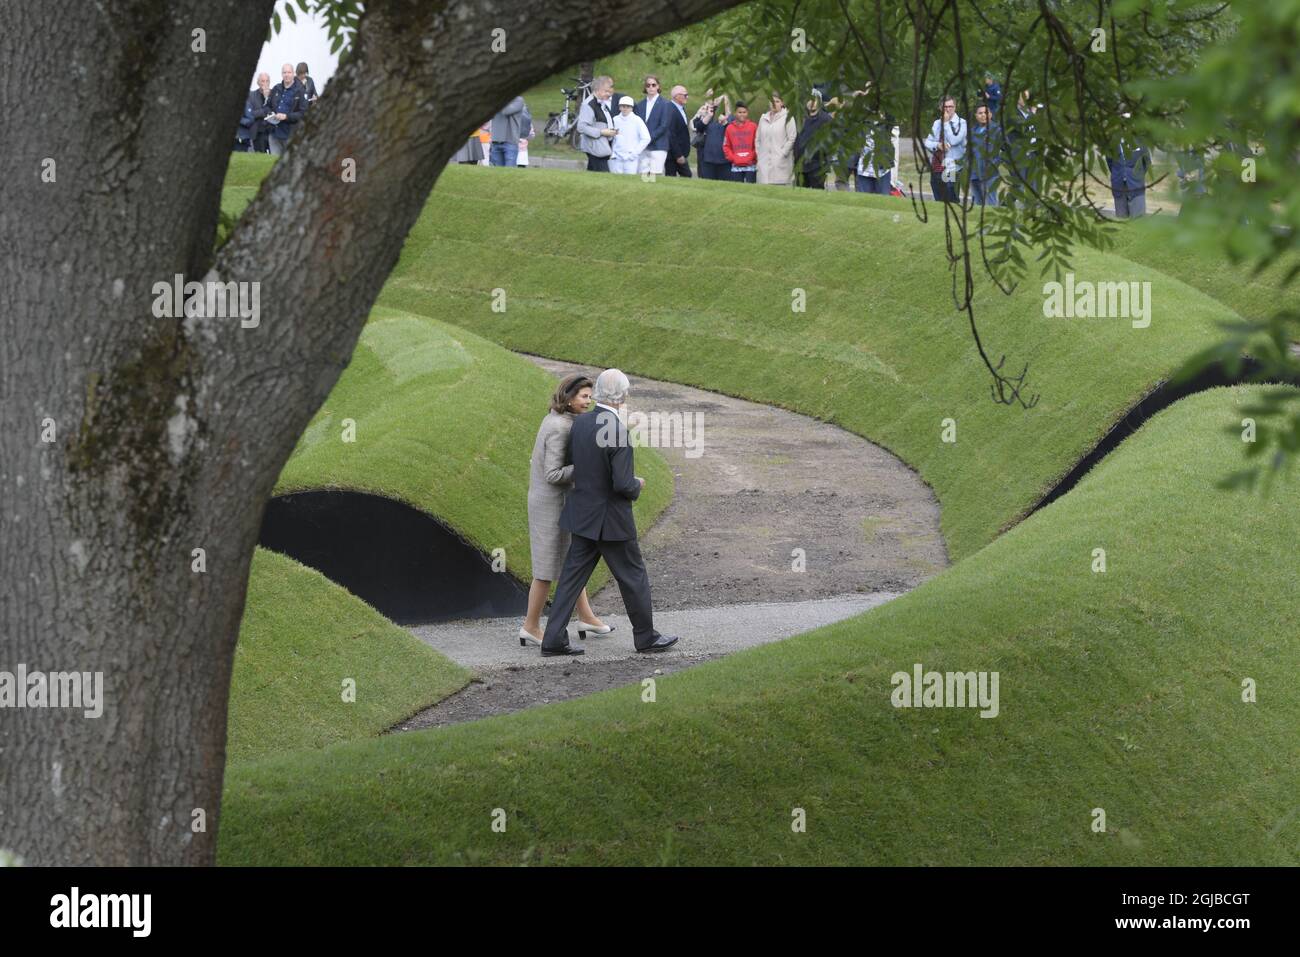 King Carl Gustaf and Queen Silvia at the inauguration of Lea Porsager´s  Gravitational Ripples in Royal Djurgarden, Stockholm, Sweden on June 5,  2018. The earthwork is a memorial to honor the 543